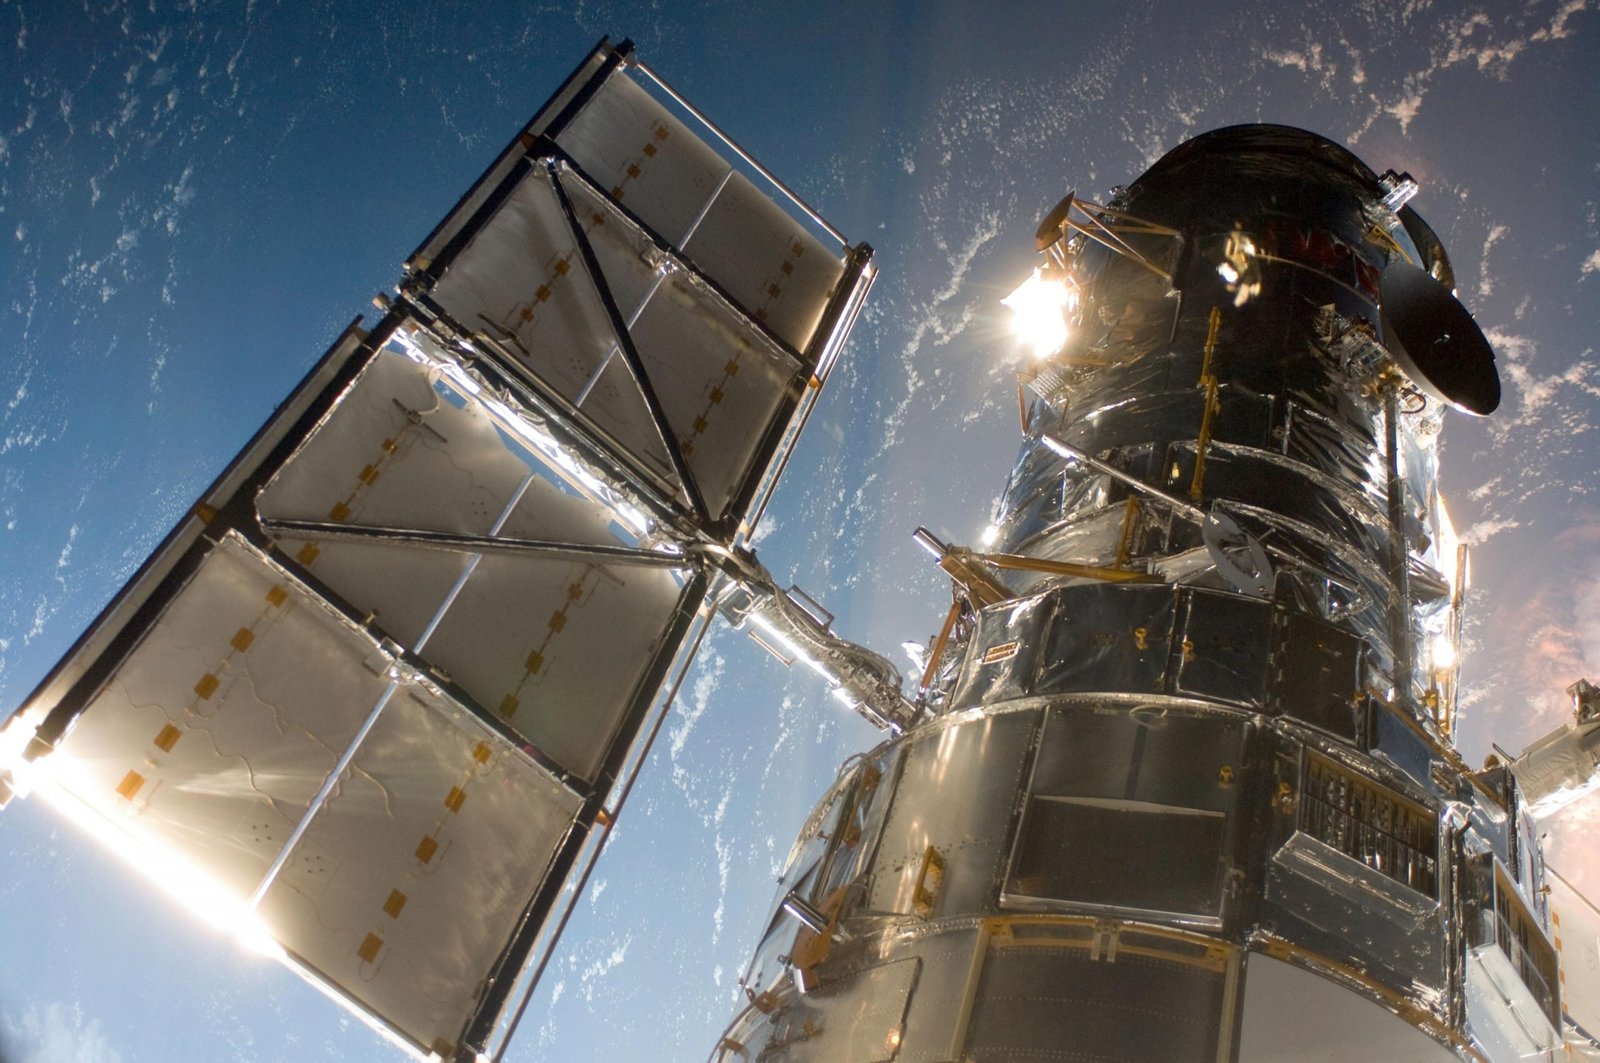 Gyroscope Failures Force NASA to Change How It Points Hubble Space Telescope